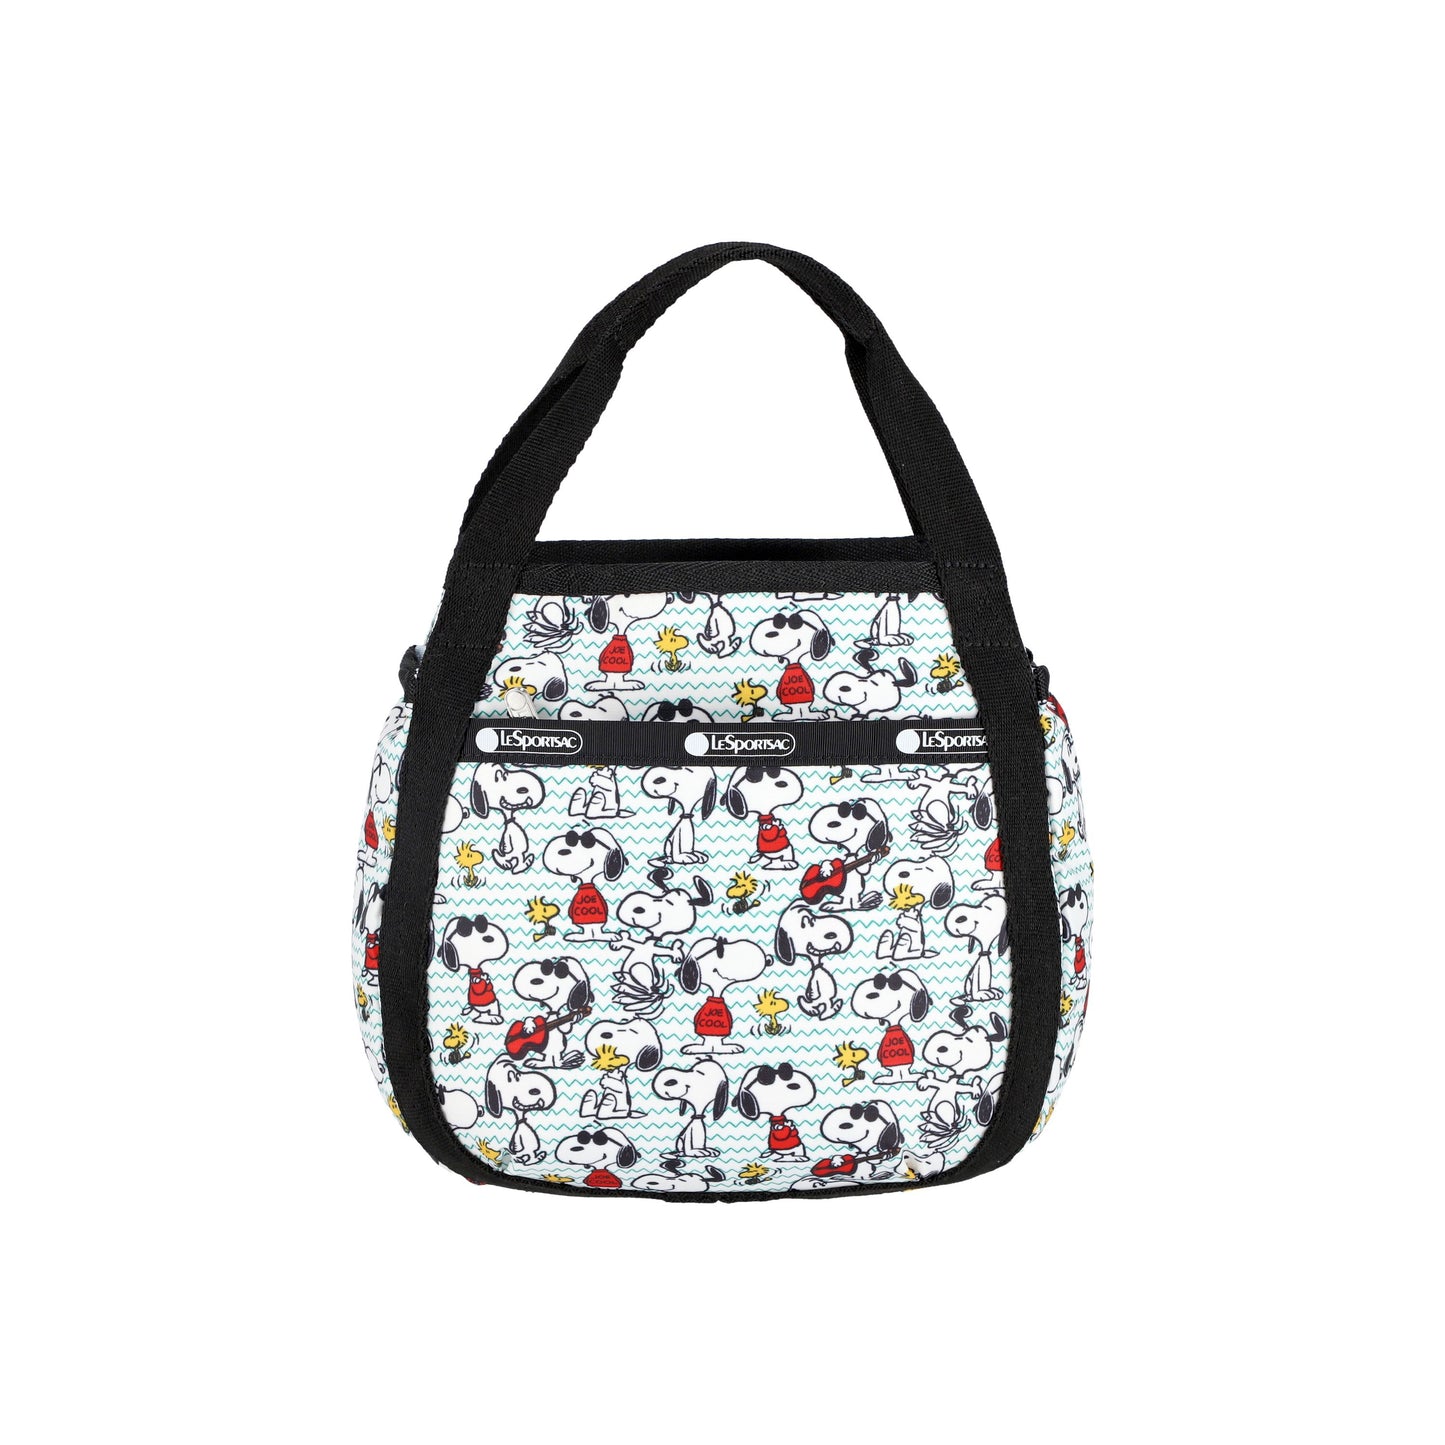 Snoopy and Woodstock Small Jenni Bag